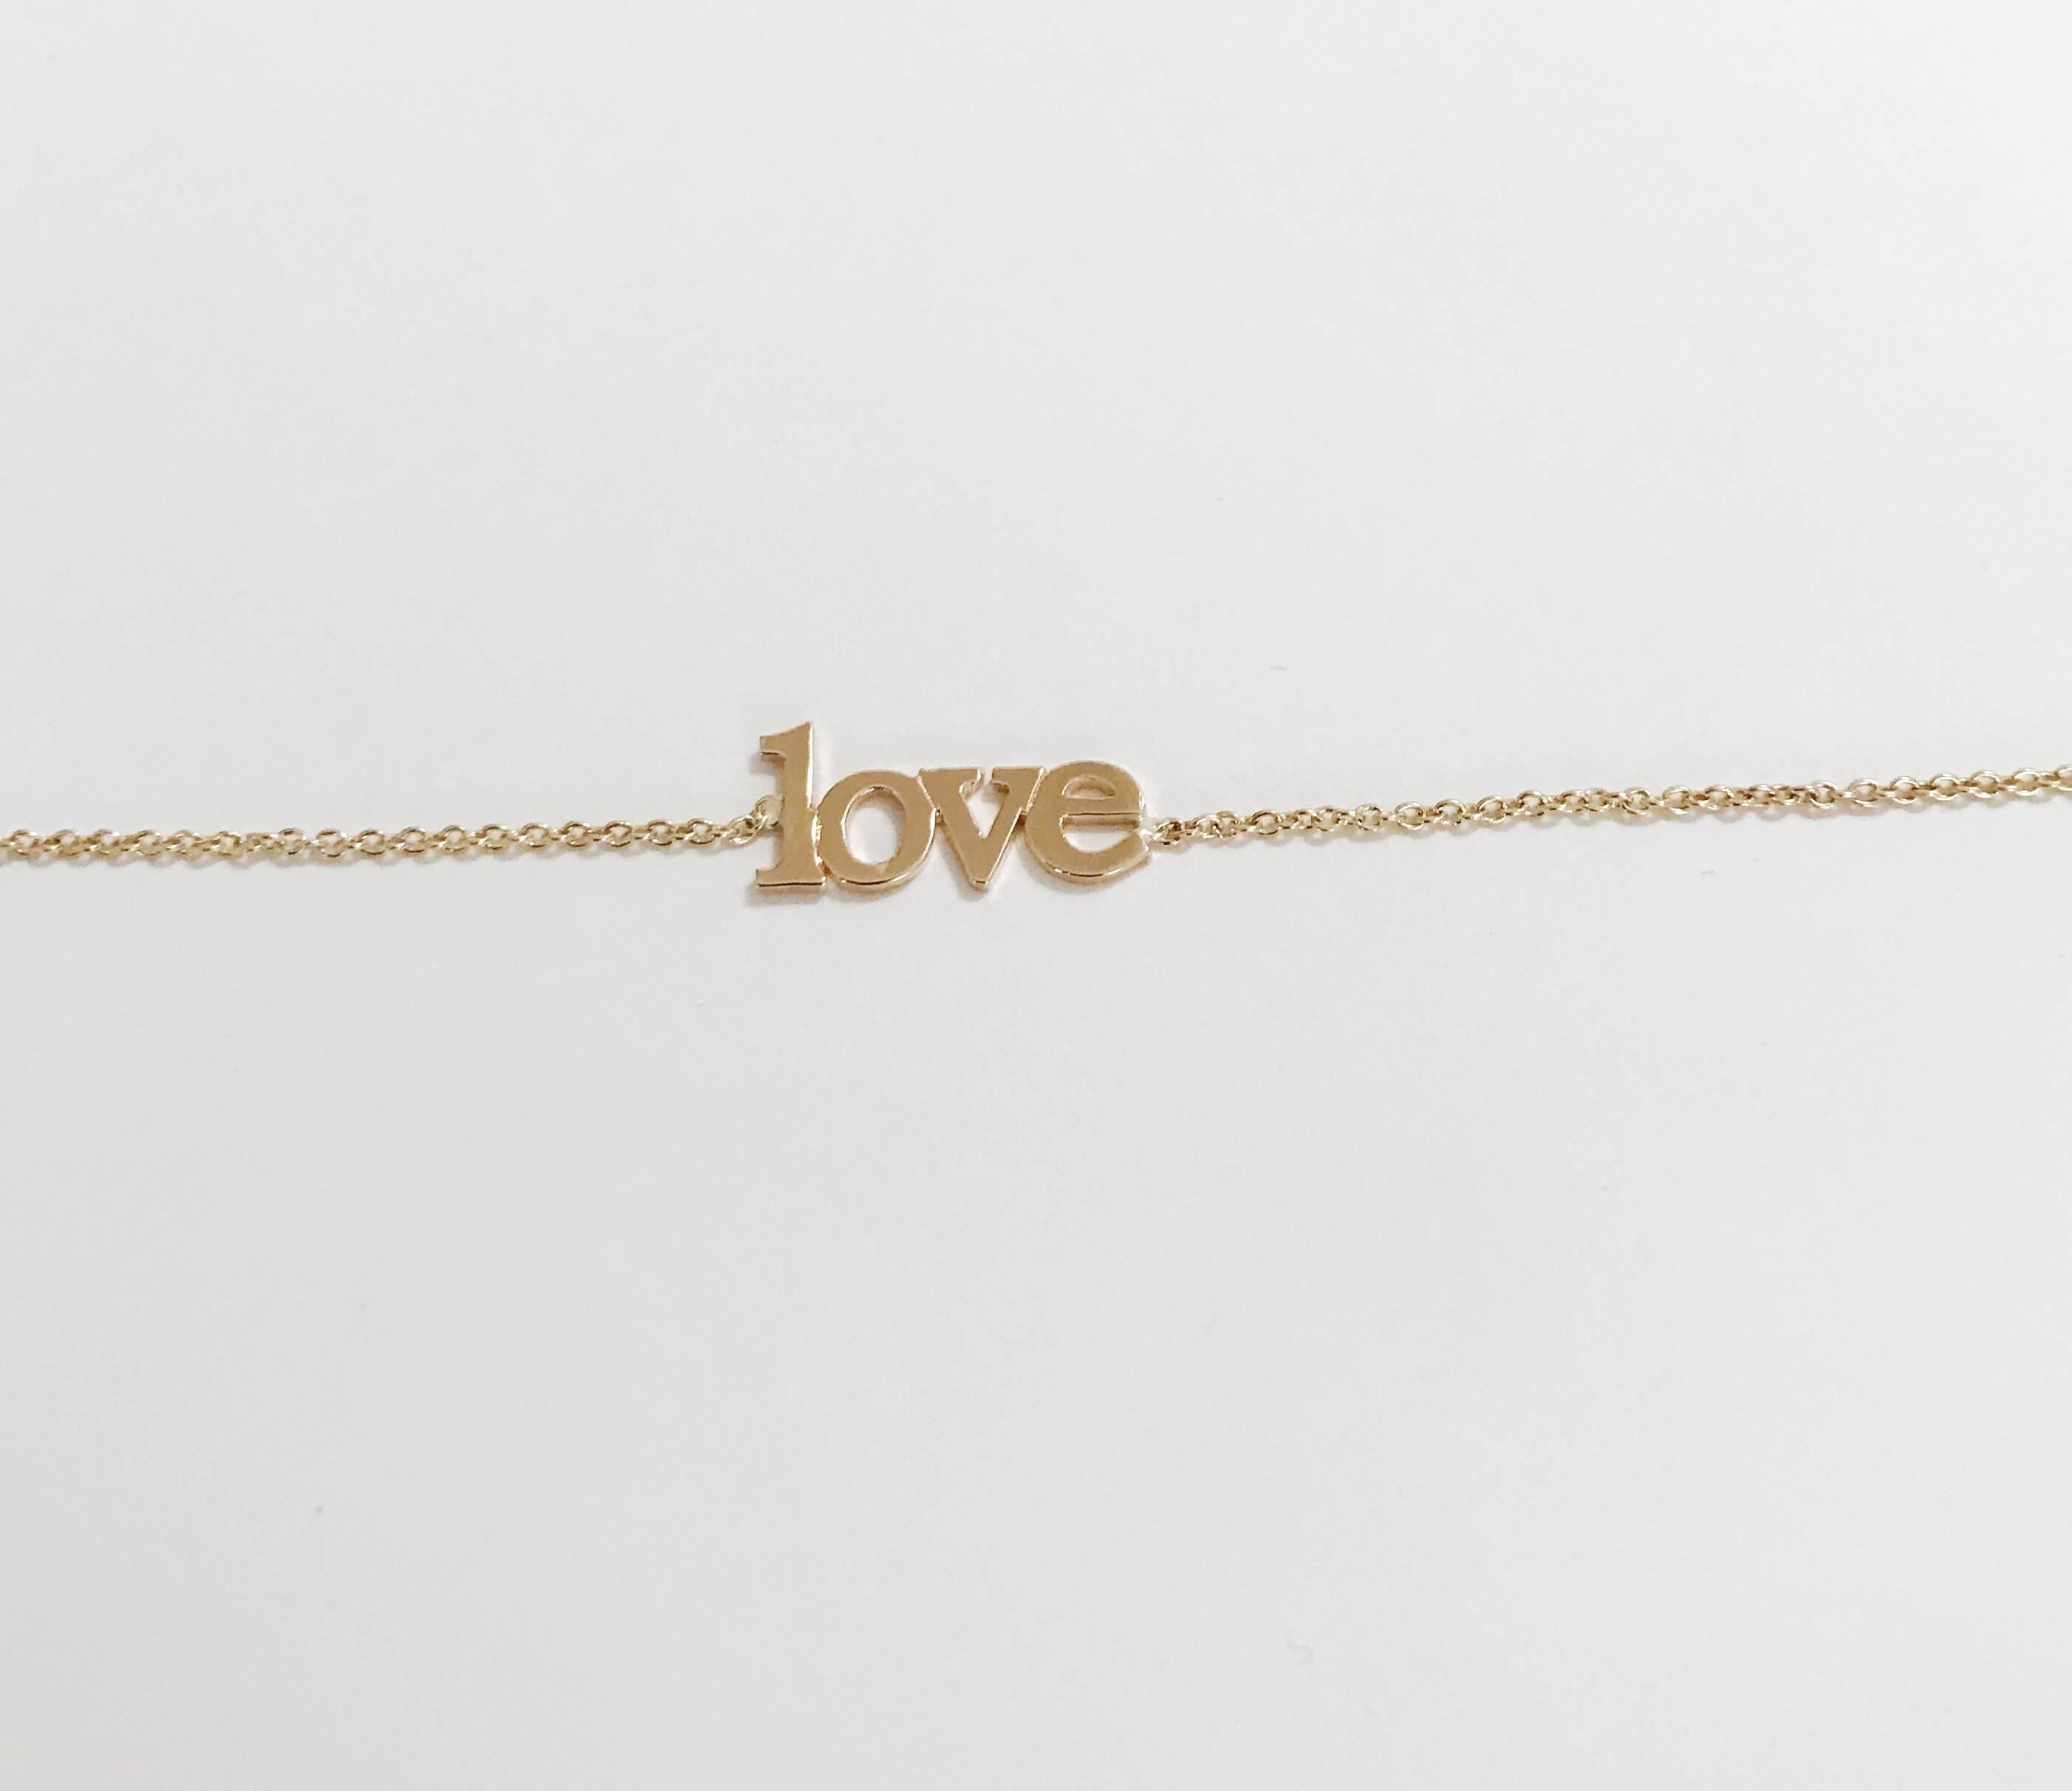 14kt Yellow Gold Small Love Bracelet measures 7.5 inches long. 

The 